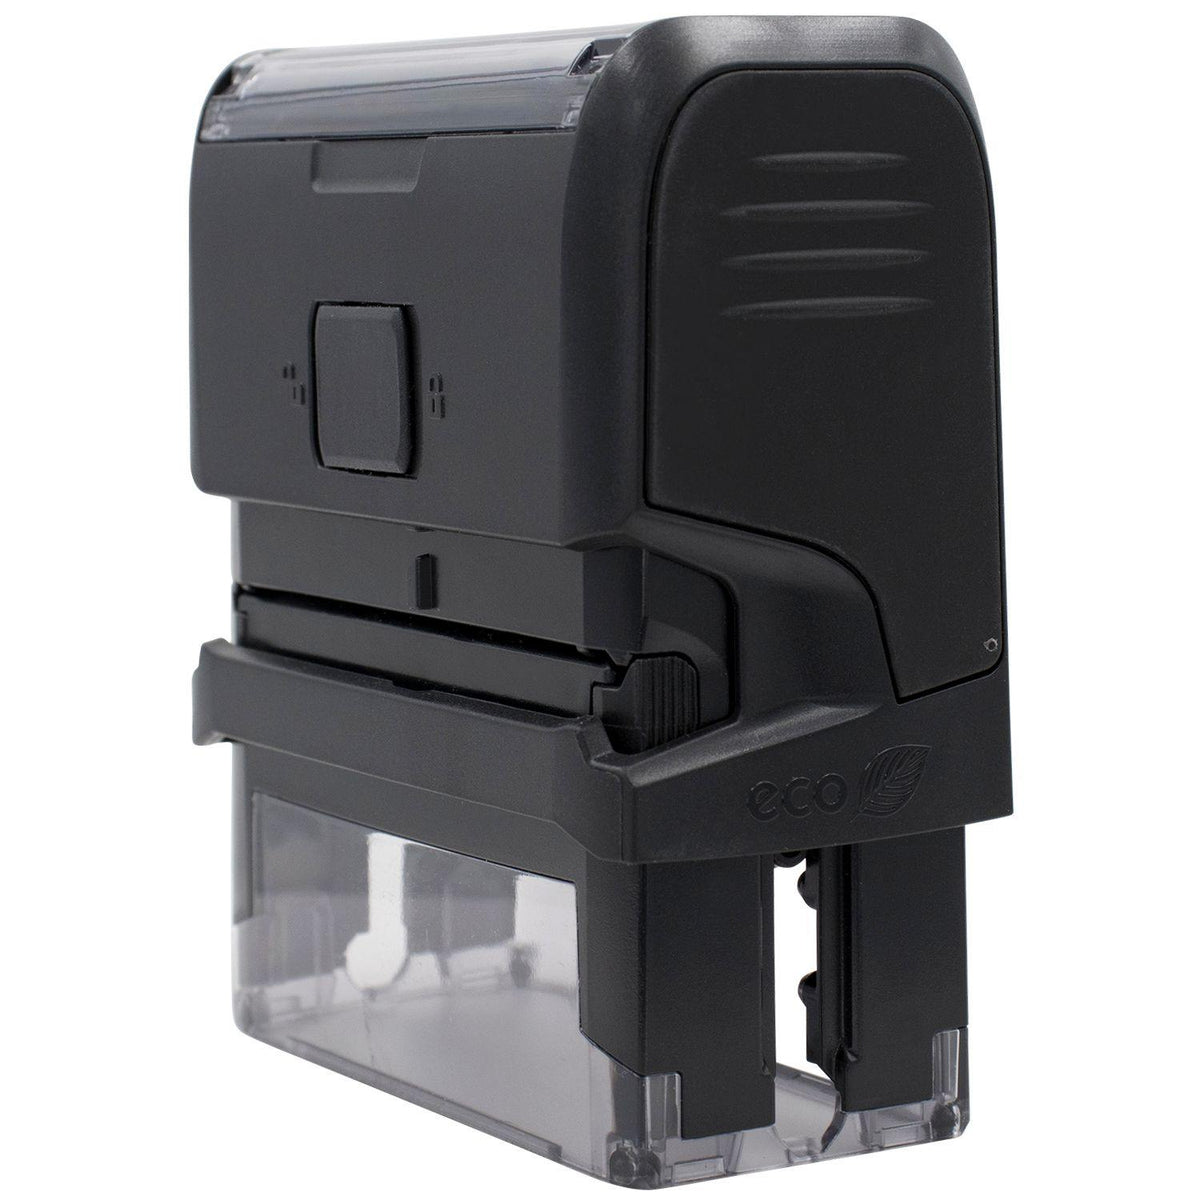 Self Inking Draft Stamp - Engineer Seal Stamps - Brand_Trodat, Impression Size_Small, Stamp Type_Self-Inking Stamp, Type of Use_Office, Type of Use_Teacher